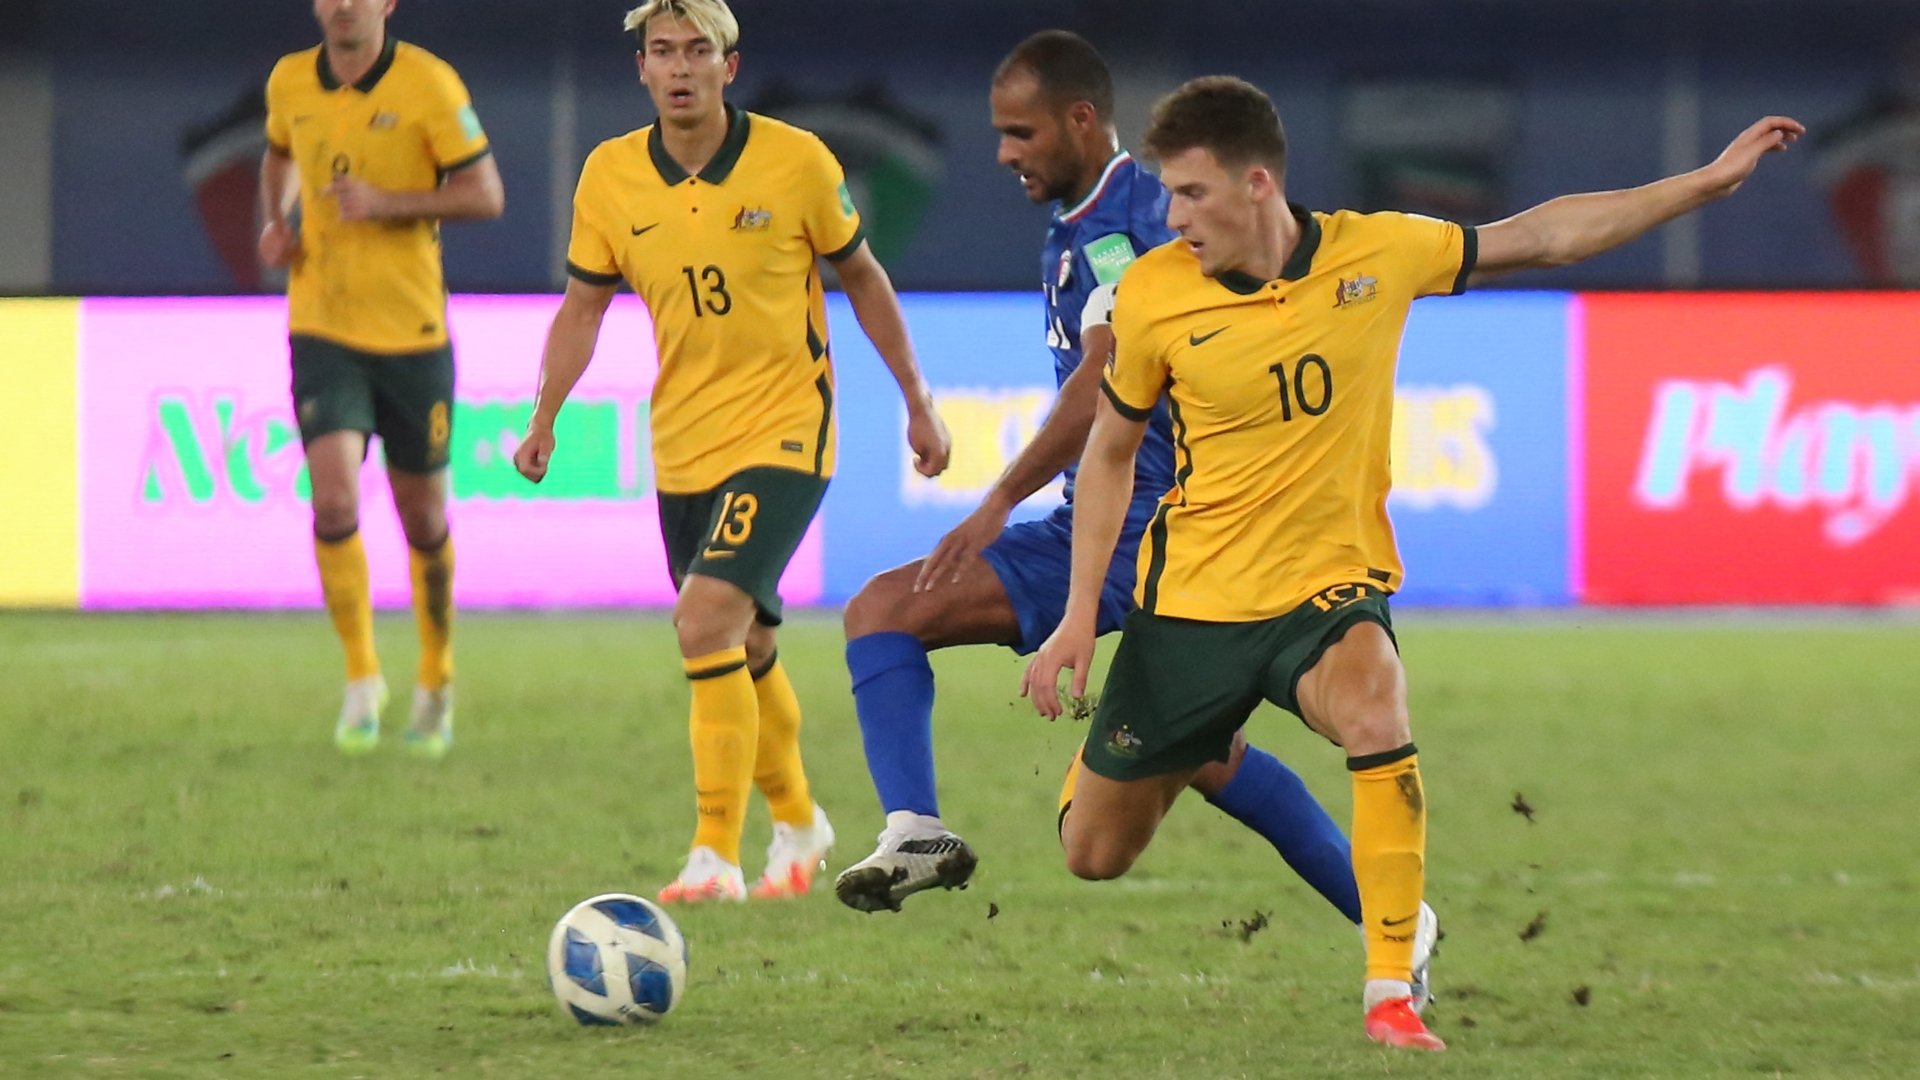 Who is Ajdin Hrustic? The new Socceroos star who dominated against Kuwait